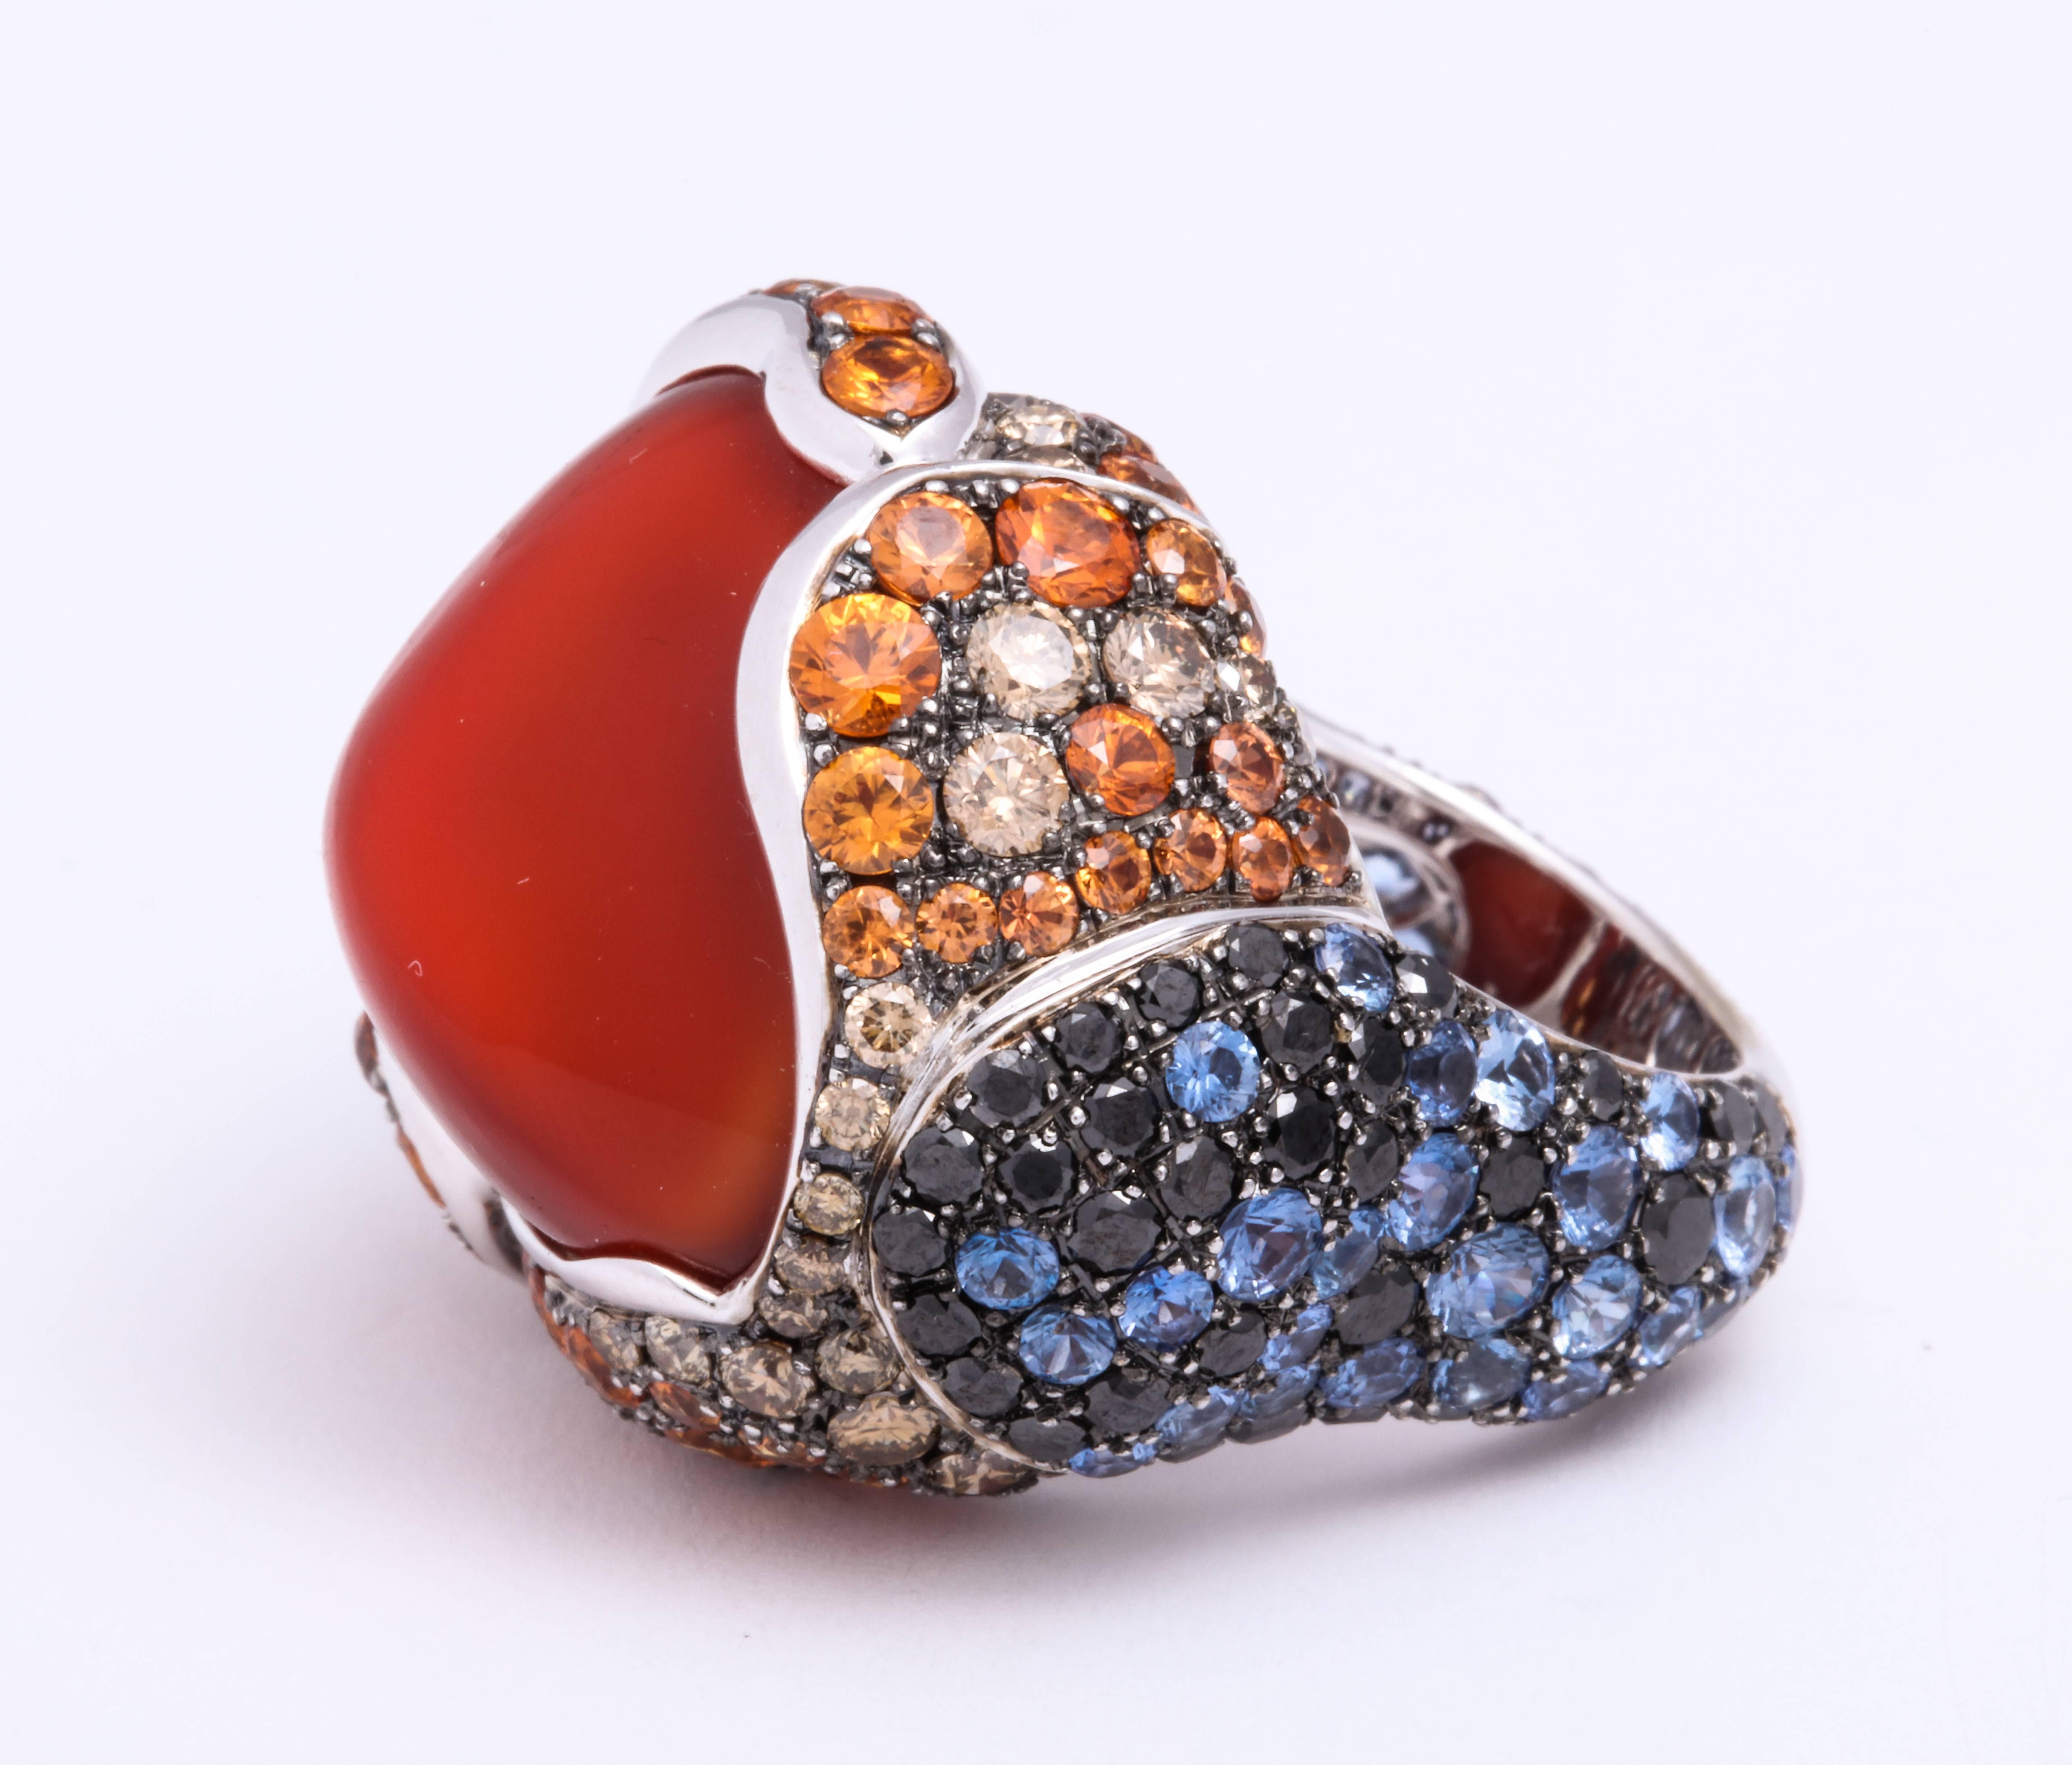 Stylish Ethiopian free-form red opal: 24.38 carats, bezel-set in bohemian chic 18 Karat white gold dome ring decorated with pave'-set round diamond-cut orange sapphires: 3.81 carats, blue sapphires: 3.05 carats, chocolate diamonds: 1.09 carats and